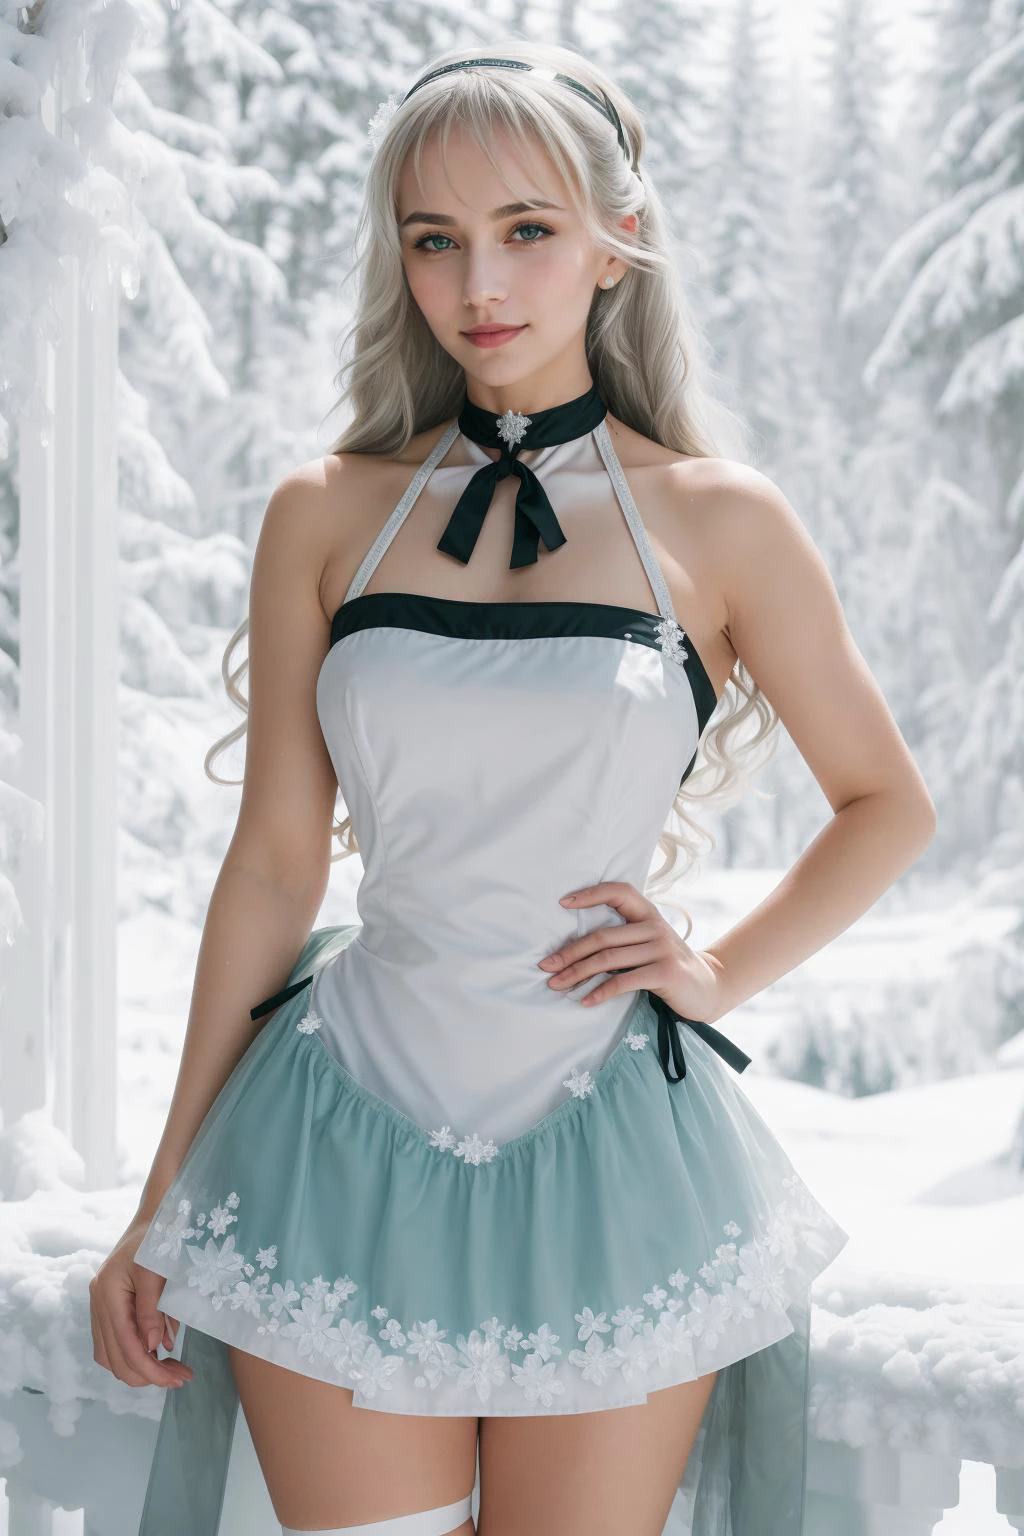 ((Masterpiece, best quality,edgQuality,photorealistic, hyper realistic)),smiling,standing,posing for a picture,
edgApron, edgice,  in a apron,ice,snow flakes ,wearing edgice edgApron
 elie macdowell, grey hair,green eyes, hairband, hair ribbon,
